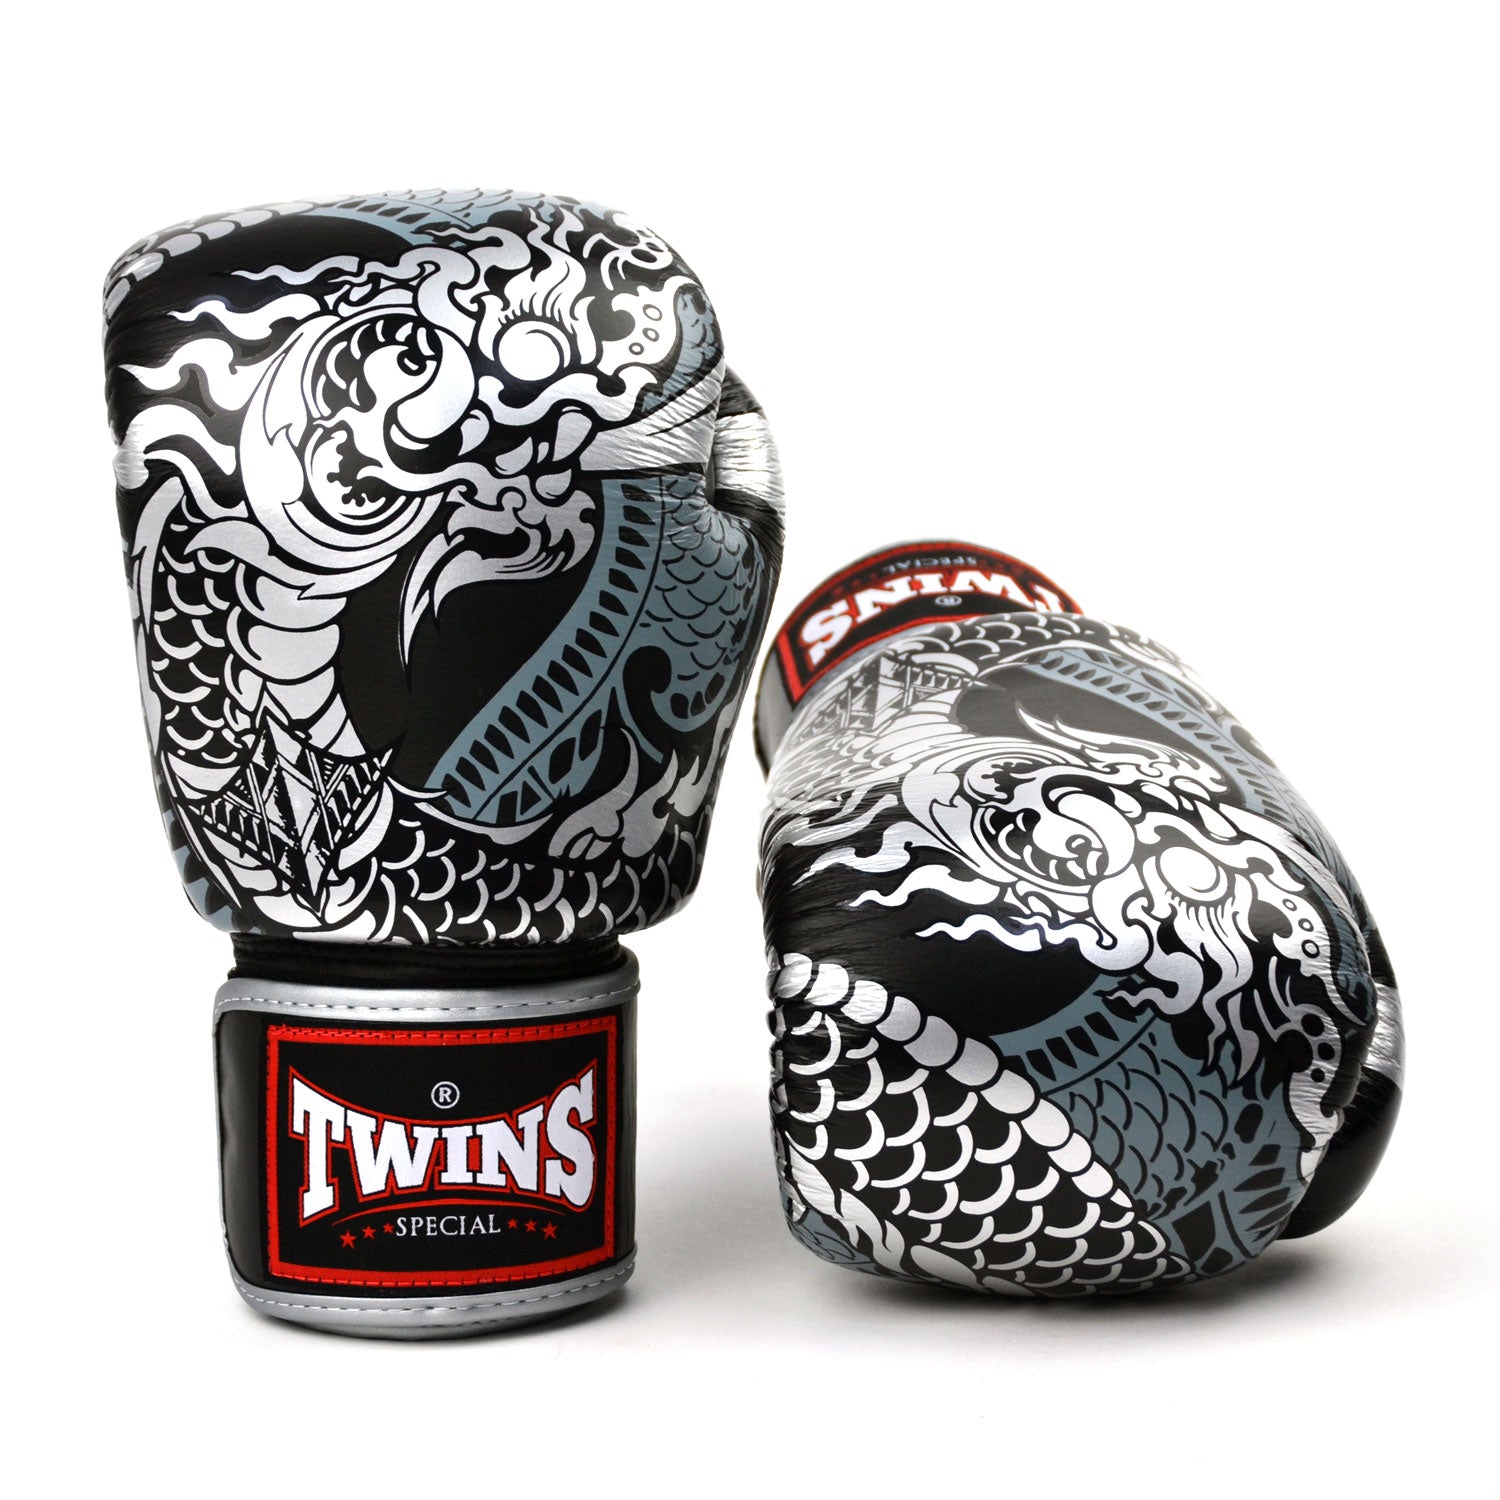 Image of FBGVL3-52 Twins Black-Silver Nagas Boxing Gloves